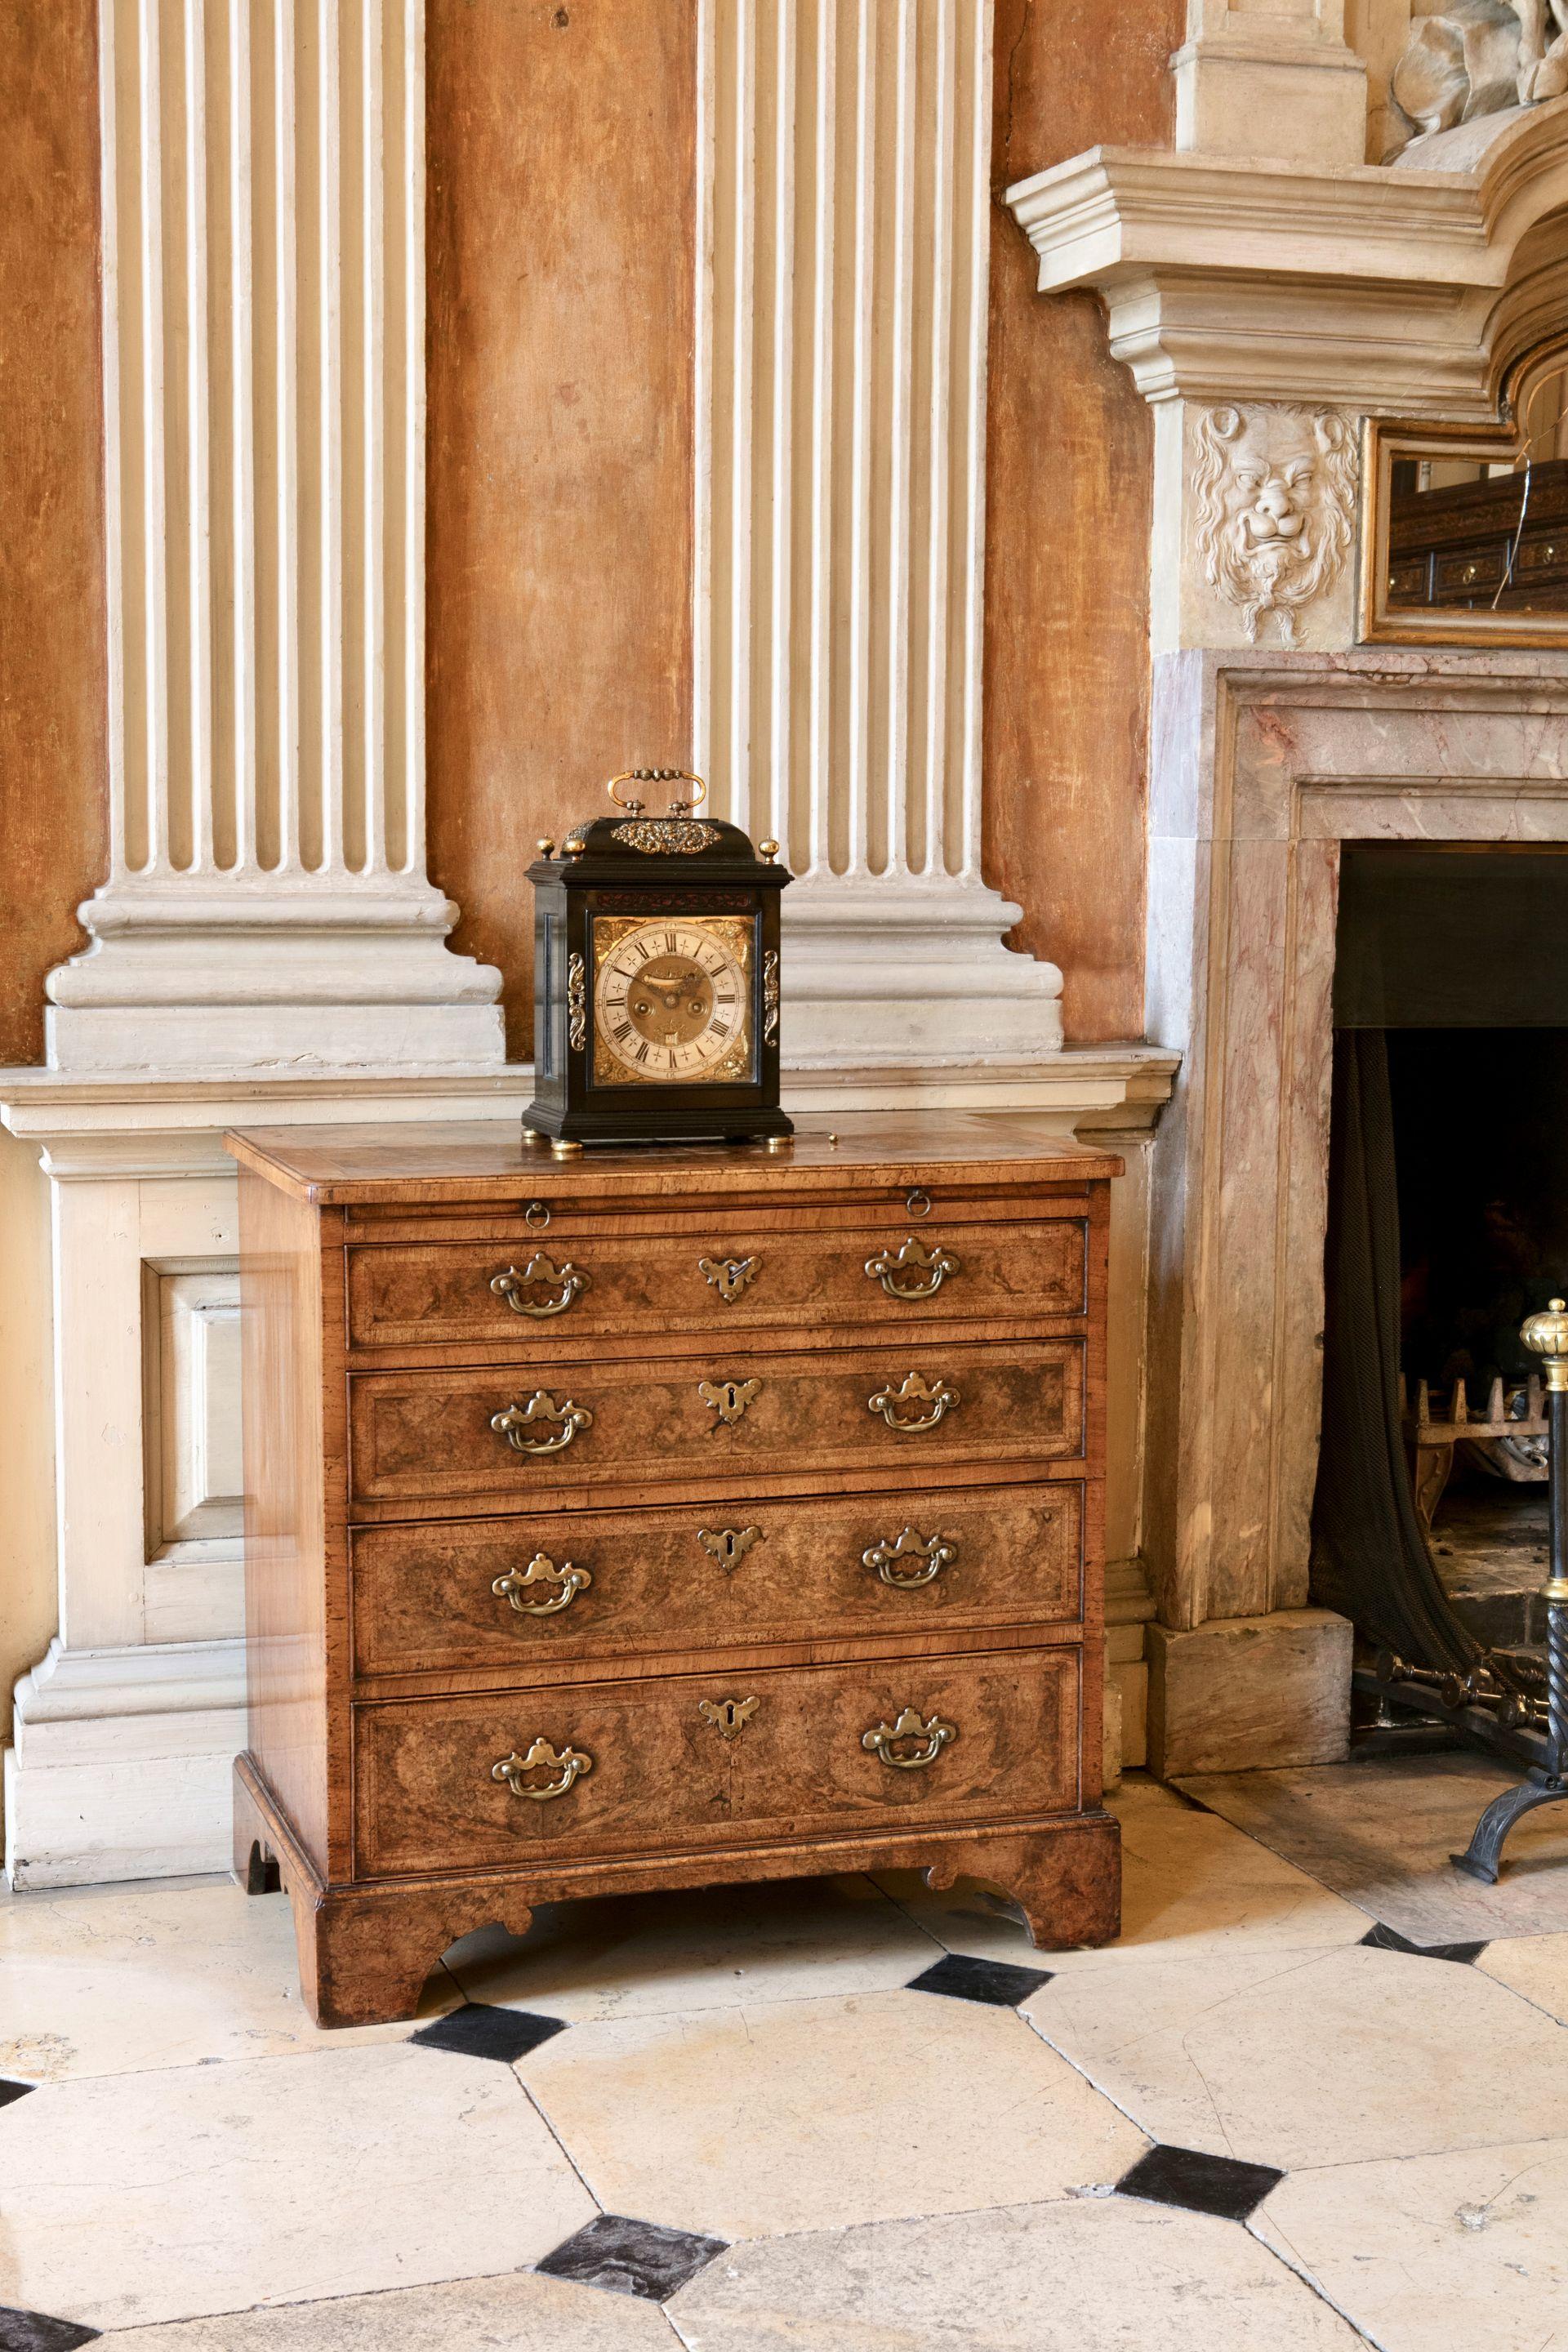 Important English furniture- George II burr walnut chest of drawers circa 1740-1750. This chest combines the very finest burr walnut veneers with the finest cabinetwork of the period.
The rectangular quarter veneered top has applied cross-grain